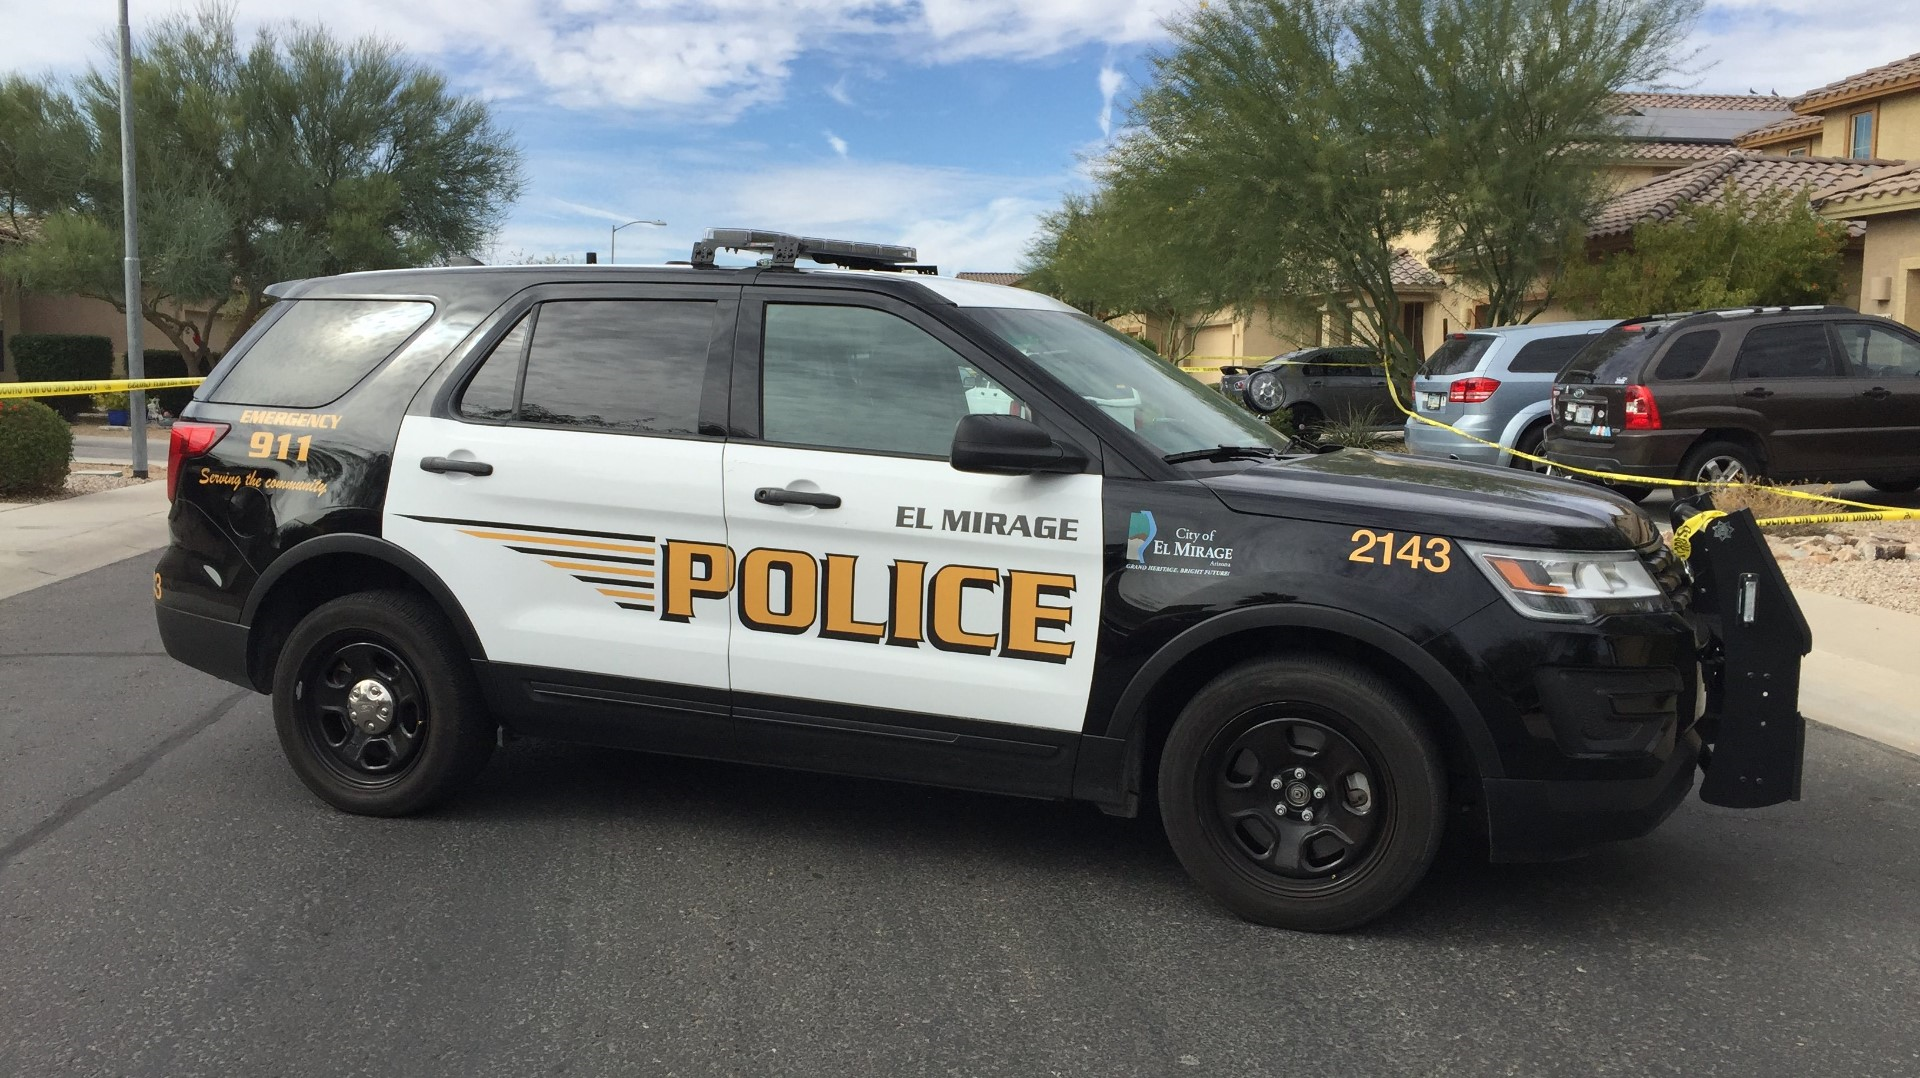 Police: 1 person dead after shooting at an El Mirage home | 12news.com